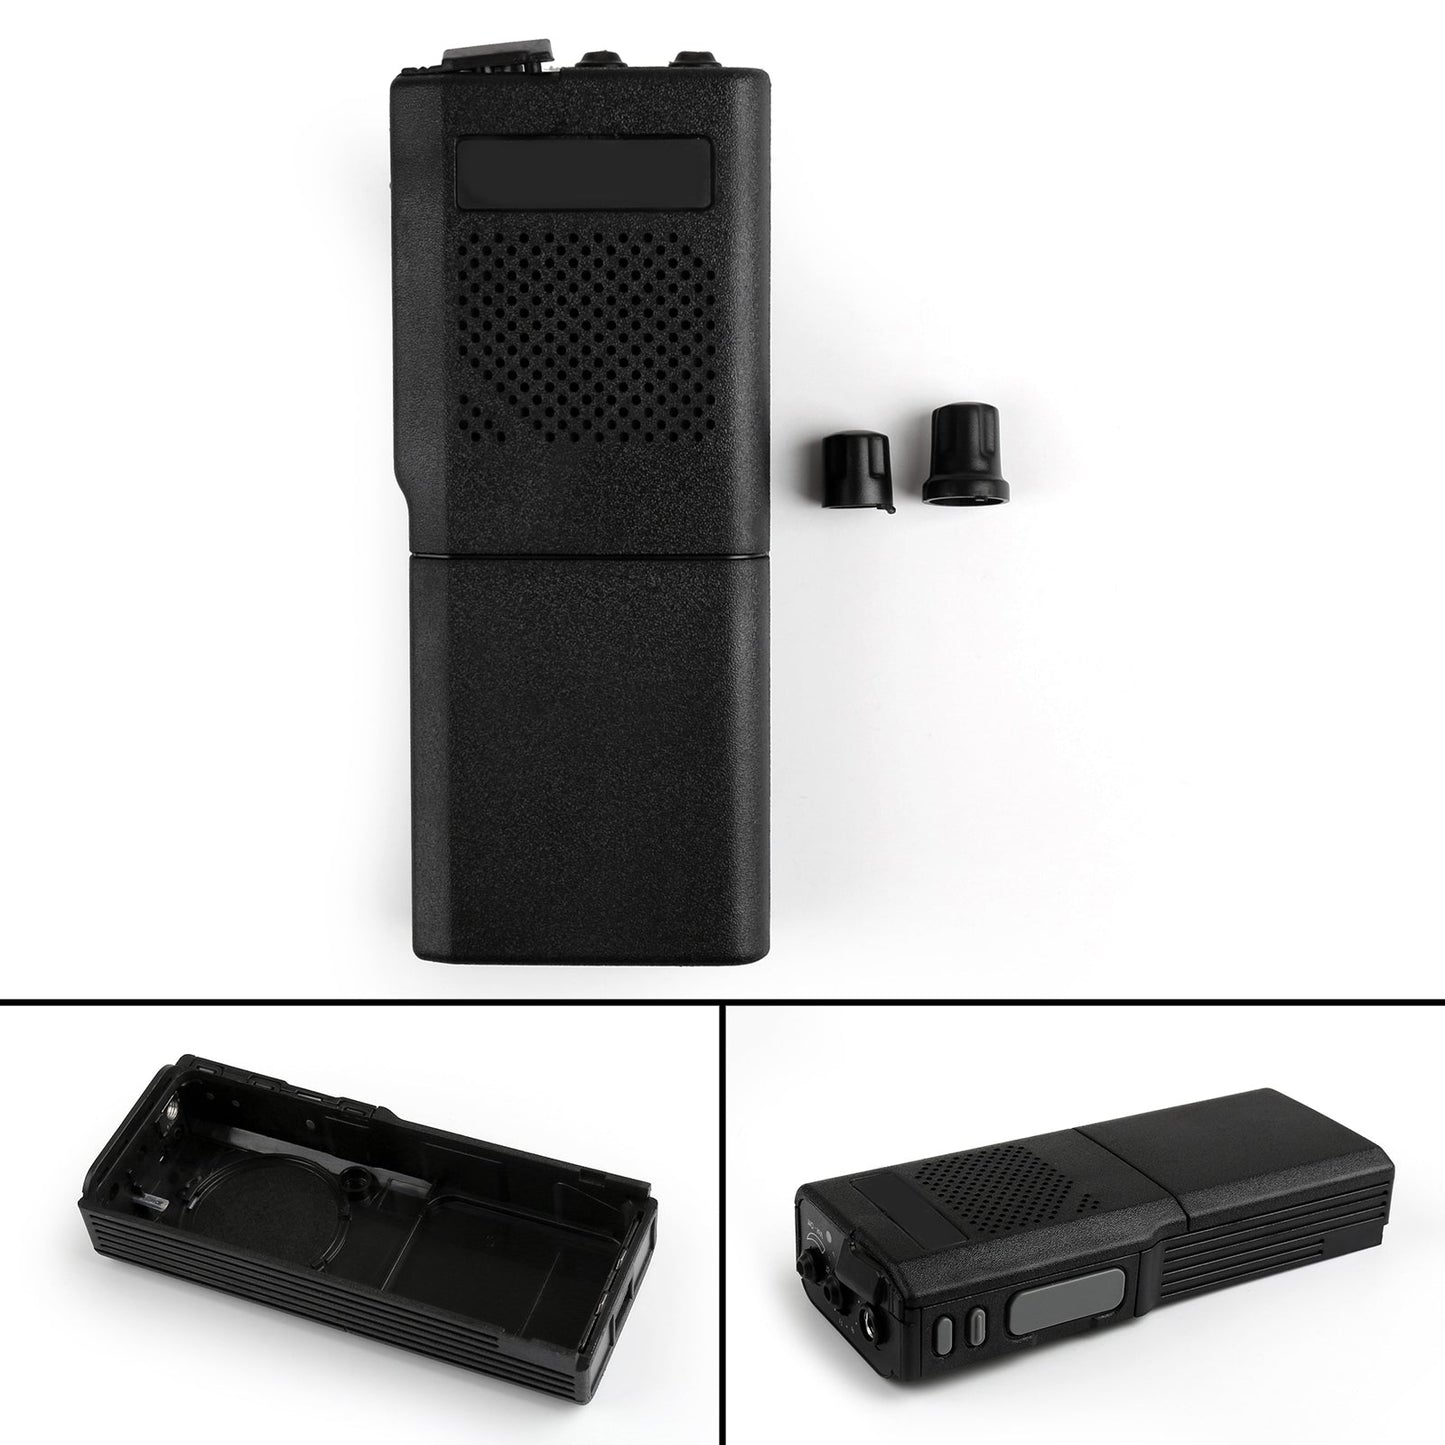 1x Front Outer Case Housing Cover Shell For Motorola GP300 Walkie Talkie Radio